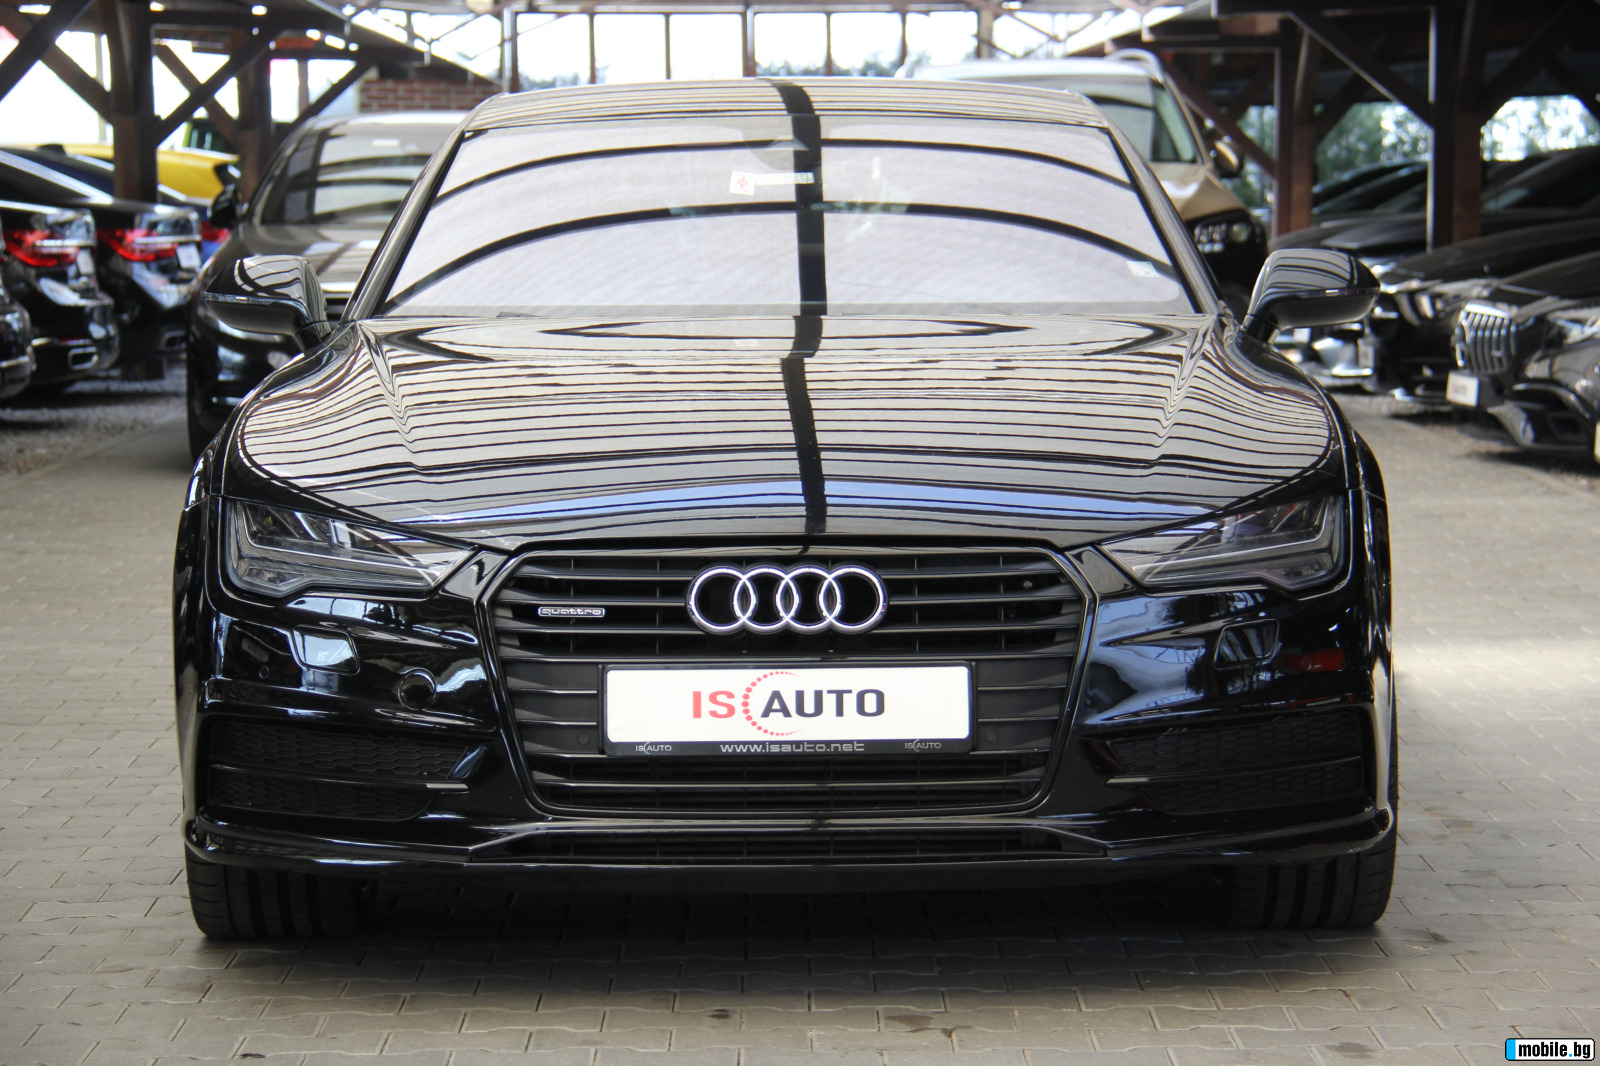 Audi A7  400 ps  Competition/Bose//Soft Close/21Zol | Mobile.bg   1